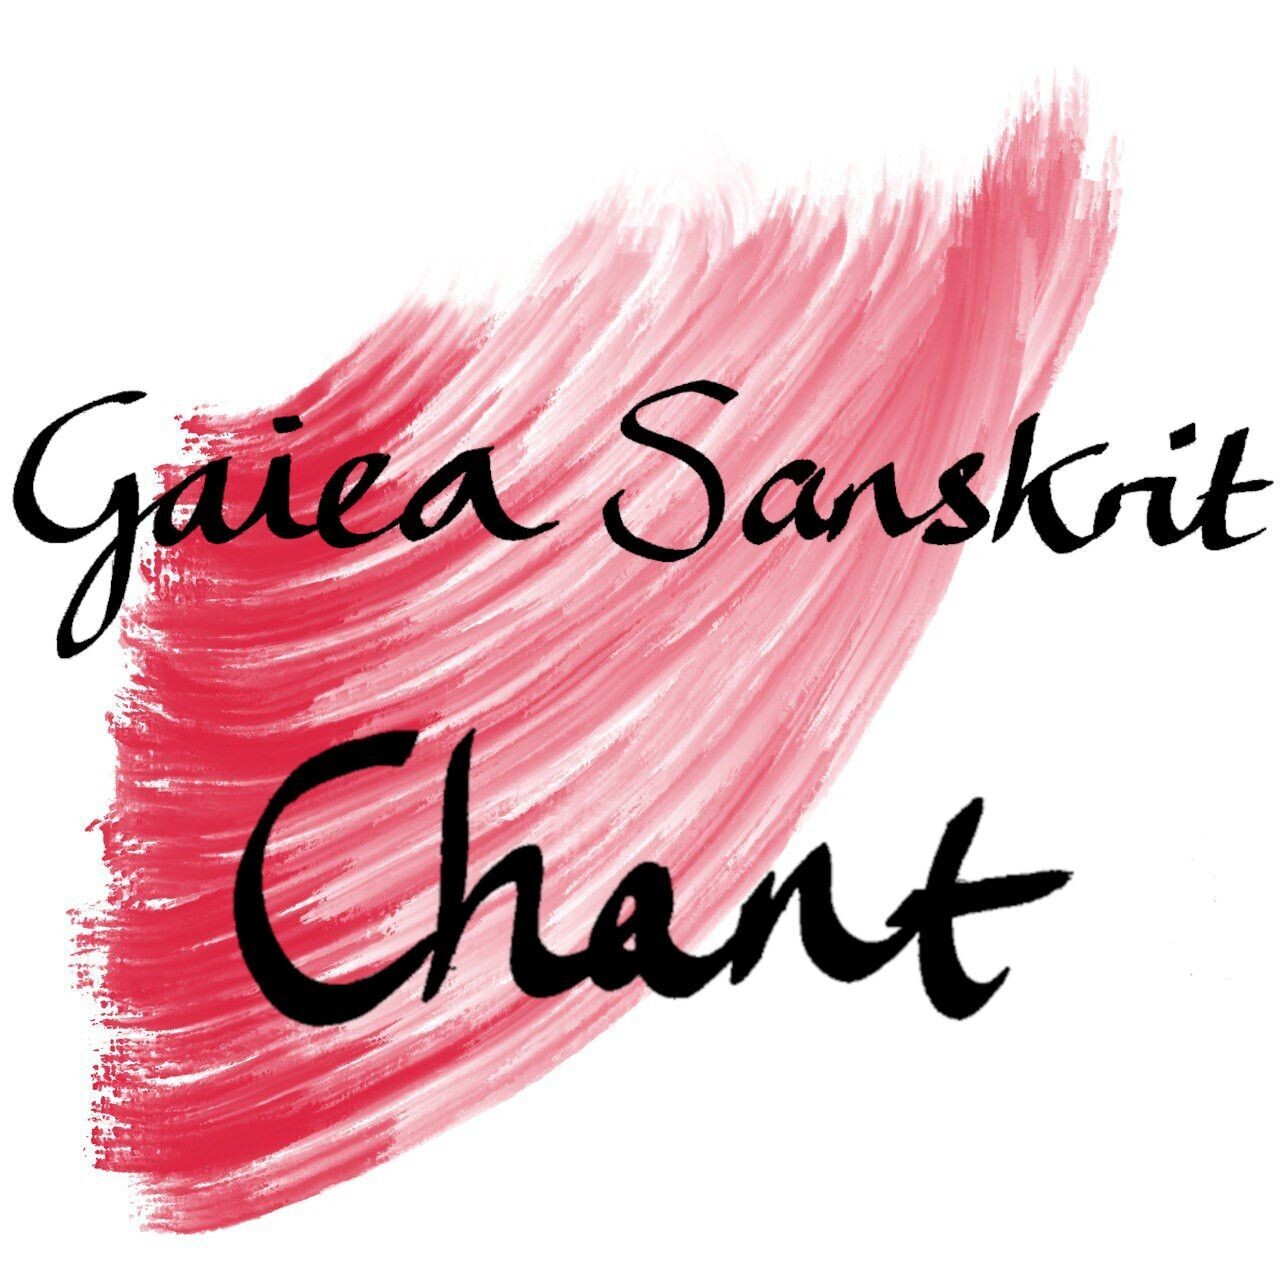 1 hour of Sanskrit Chanting with Gaiea